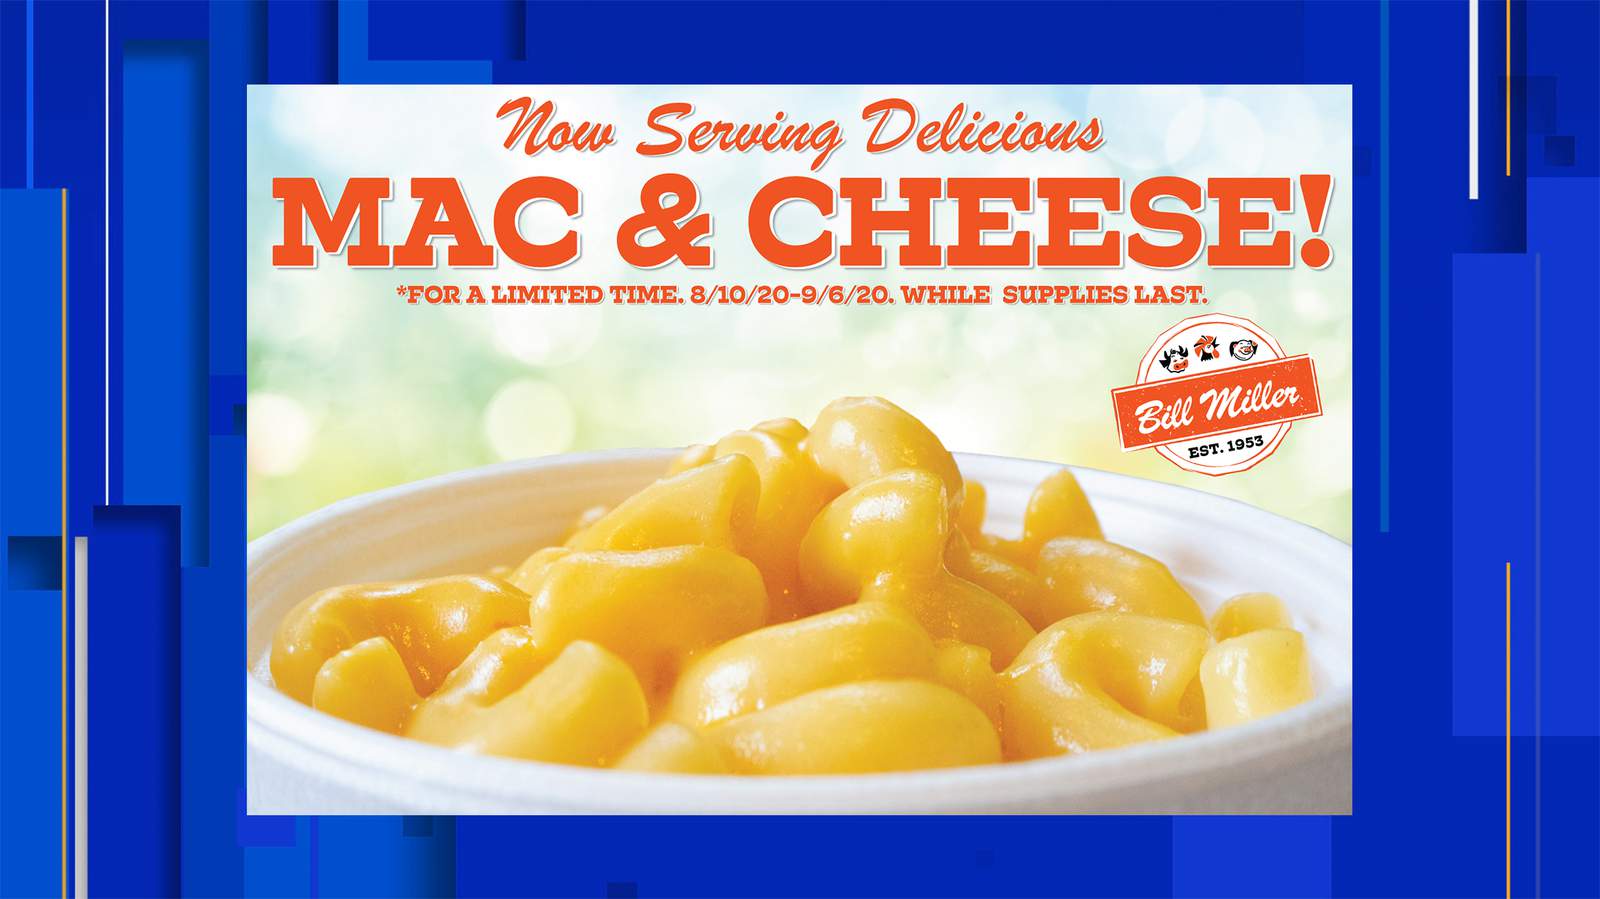 Bill Miller Bar-B-Q to serve Mac and Cheese for a limited time